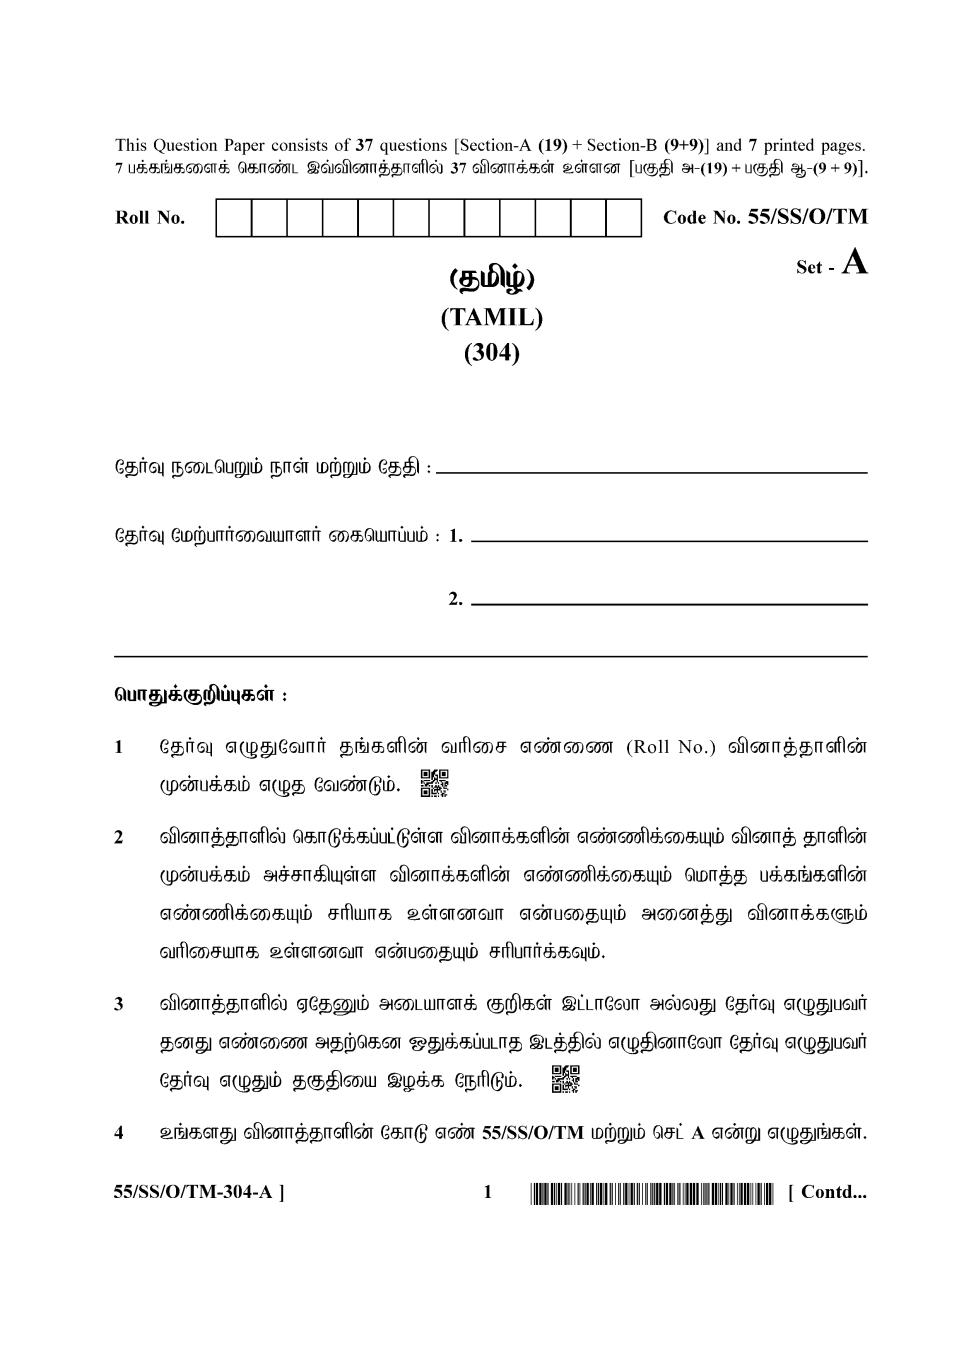 NIOS Class 12 Question Paper Oct 2017 - Tamil - Page 1